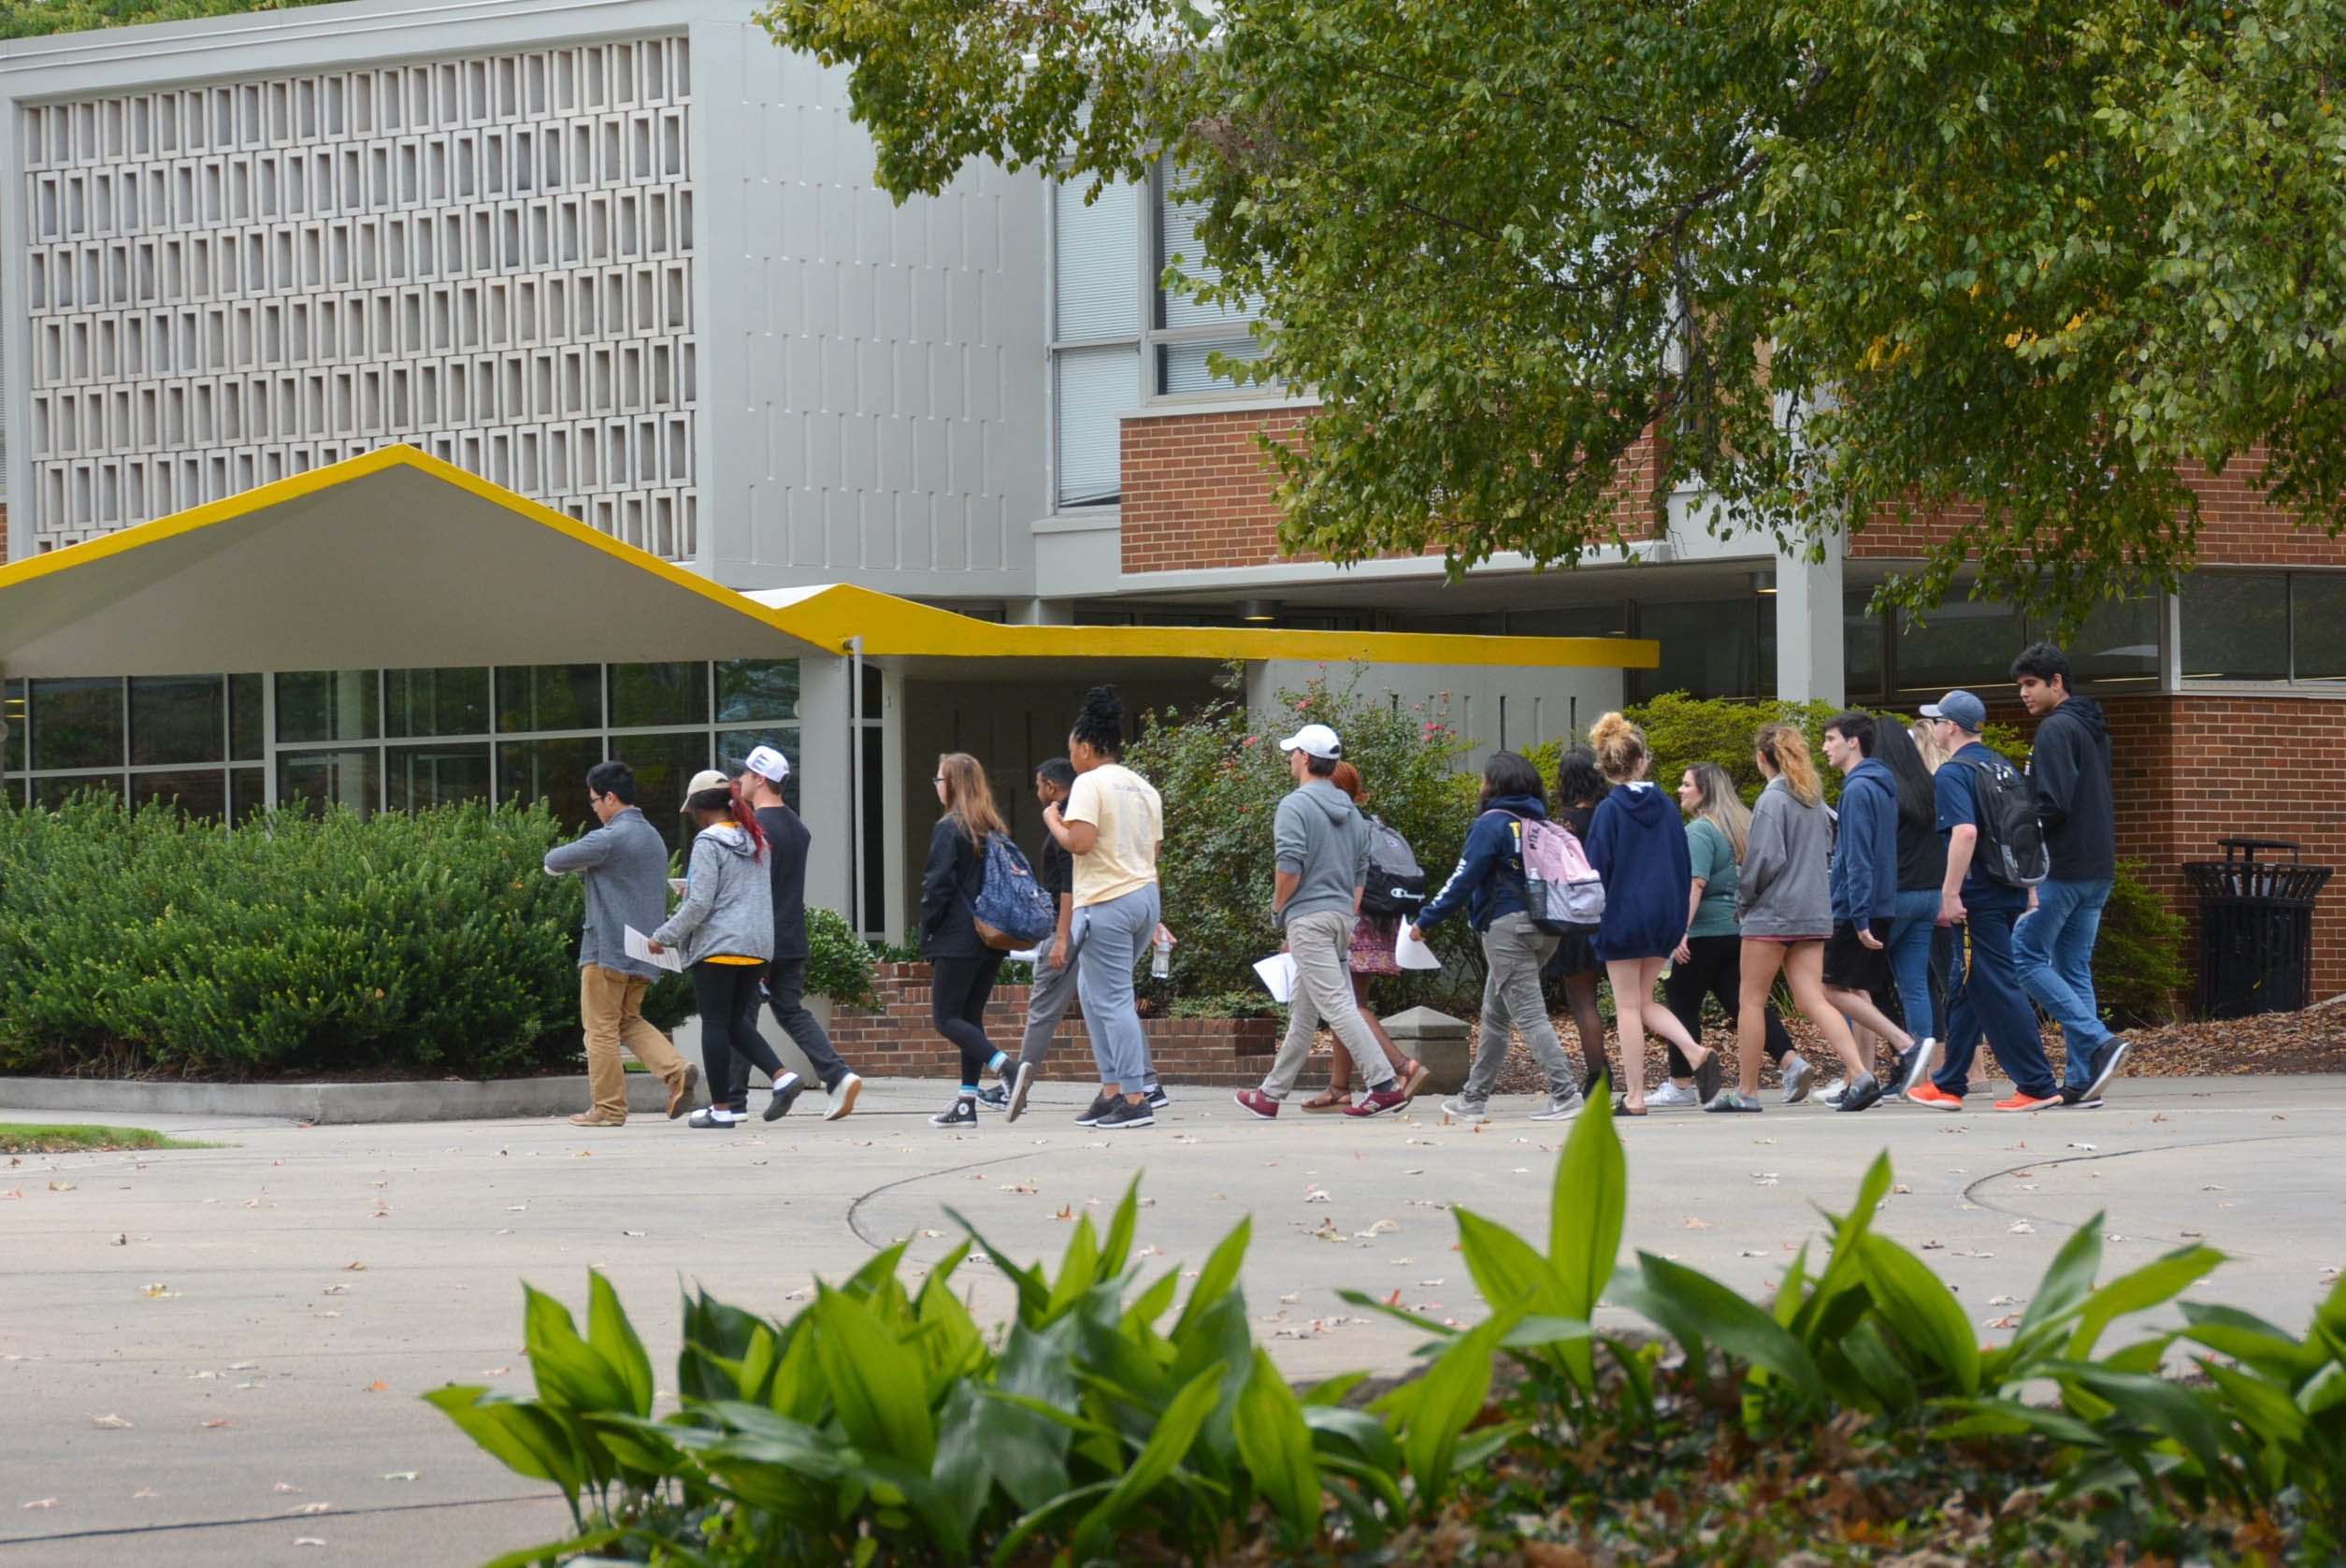 KSU launches new Campus Concierge service to answer questions